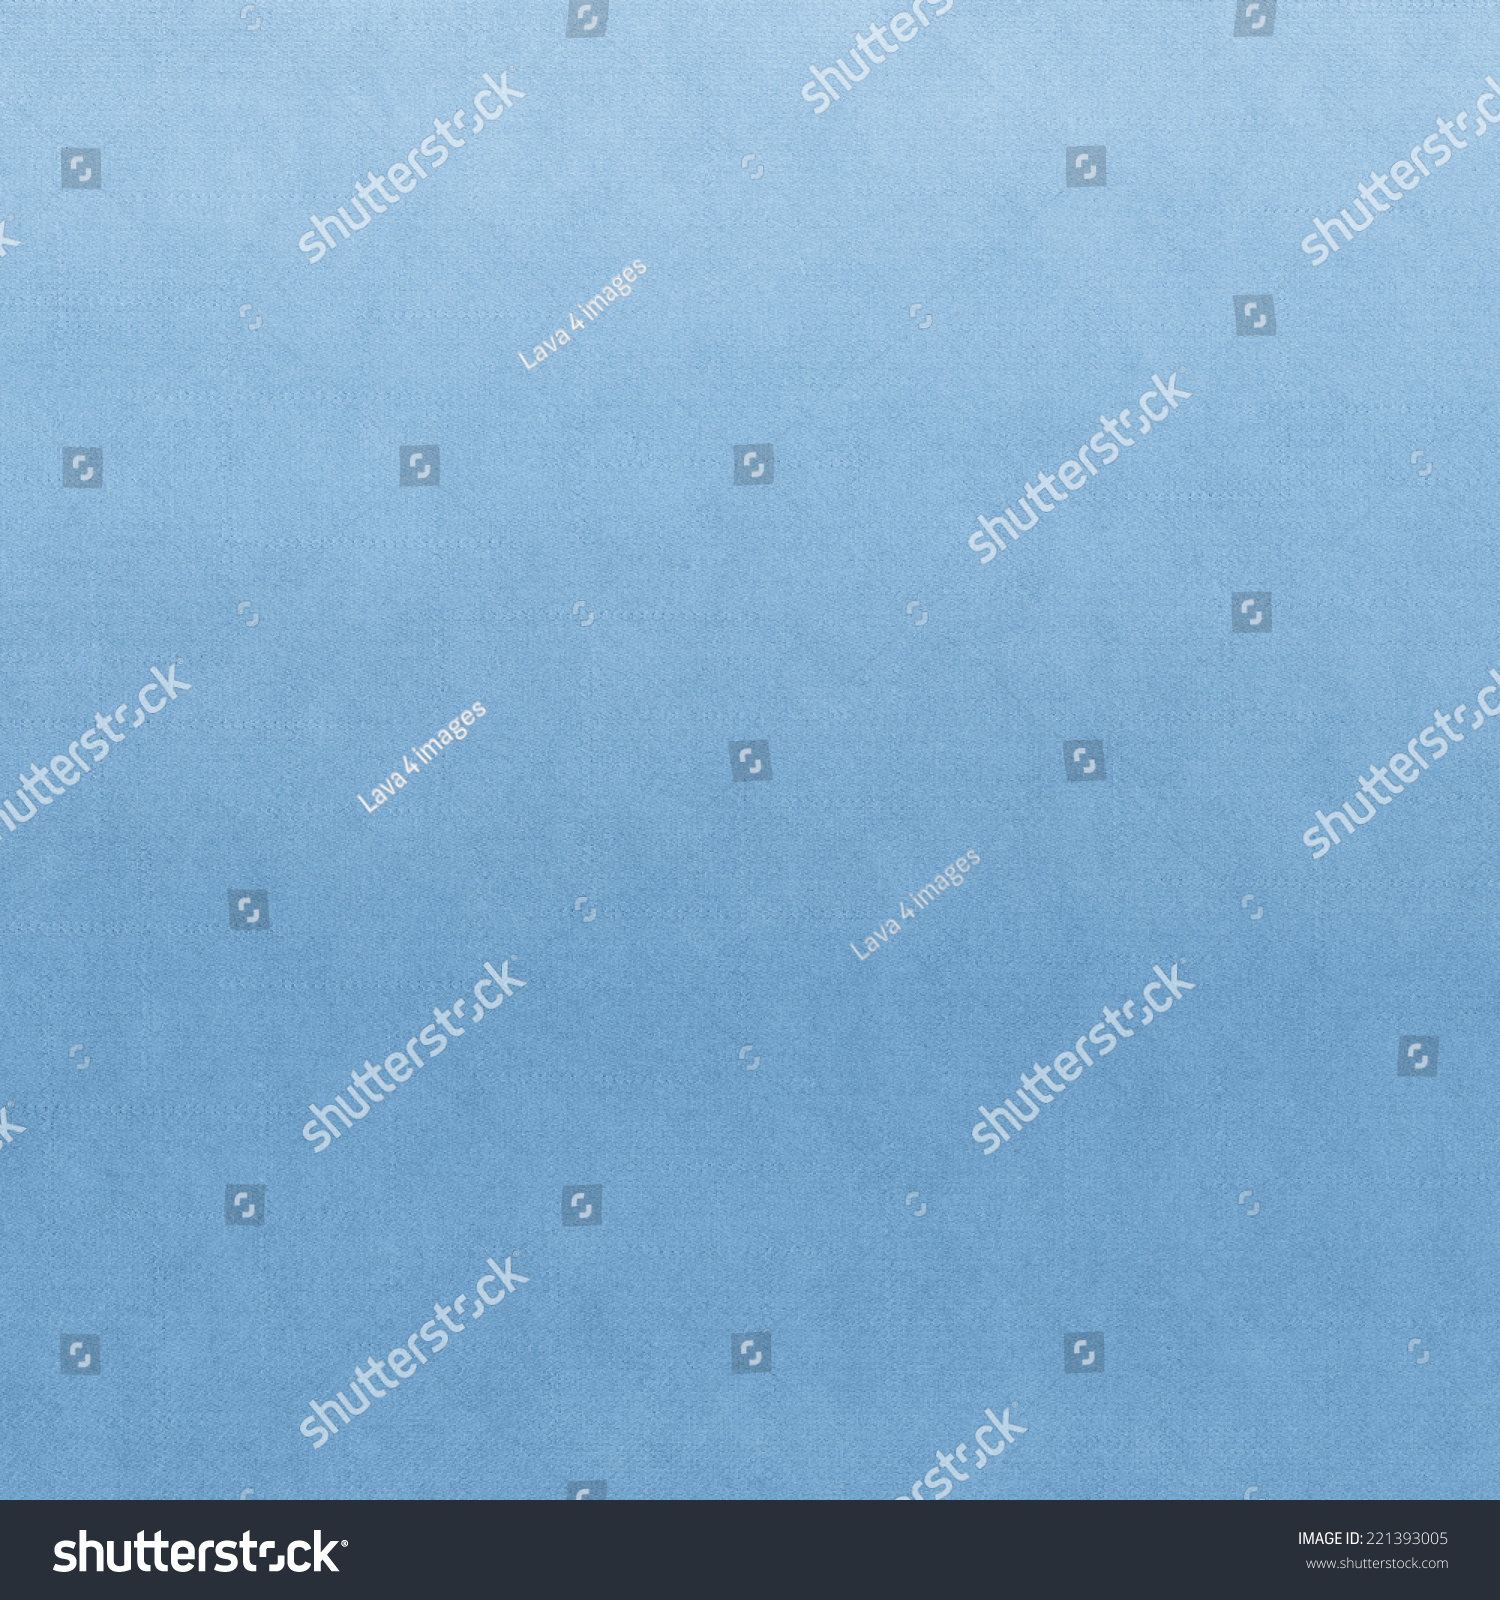 Classic Fabric Texture Background In Elegant Graduated Light Baby Blue ...